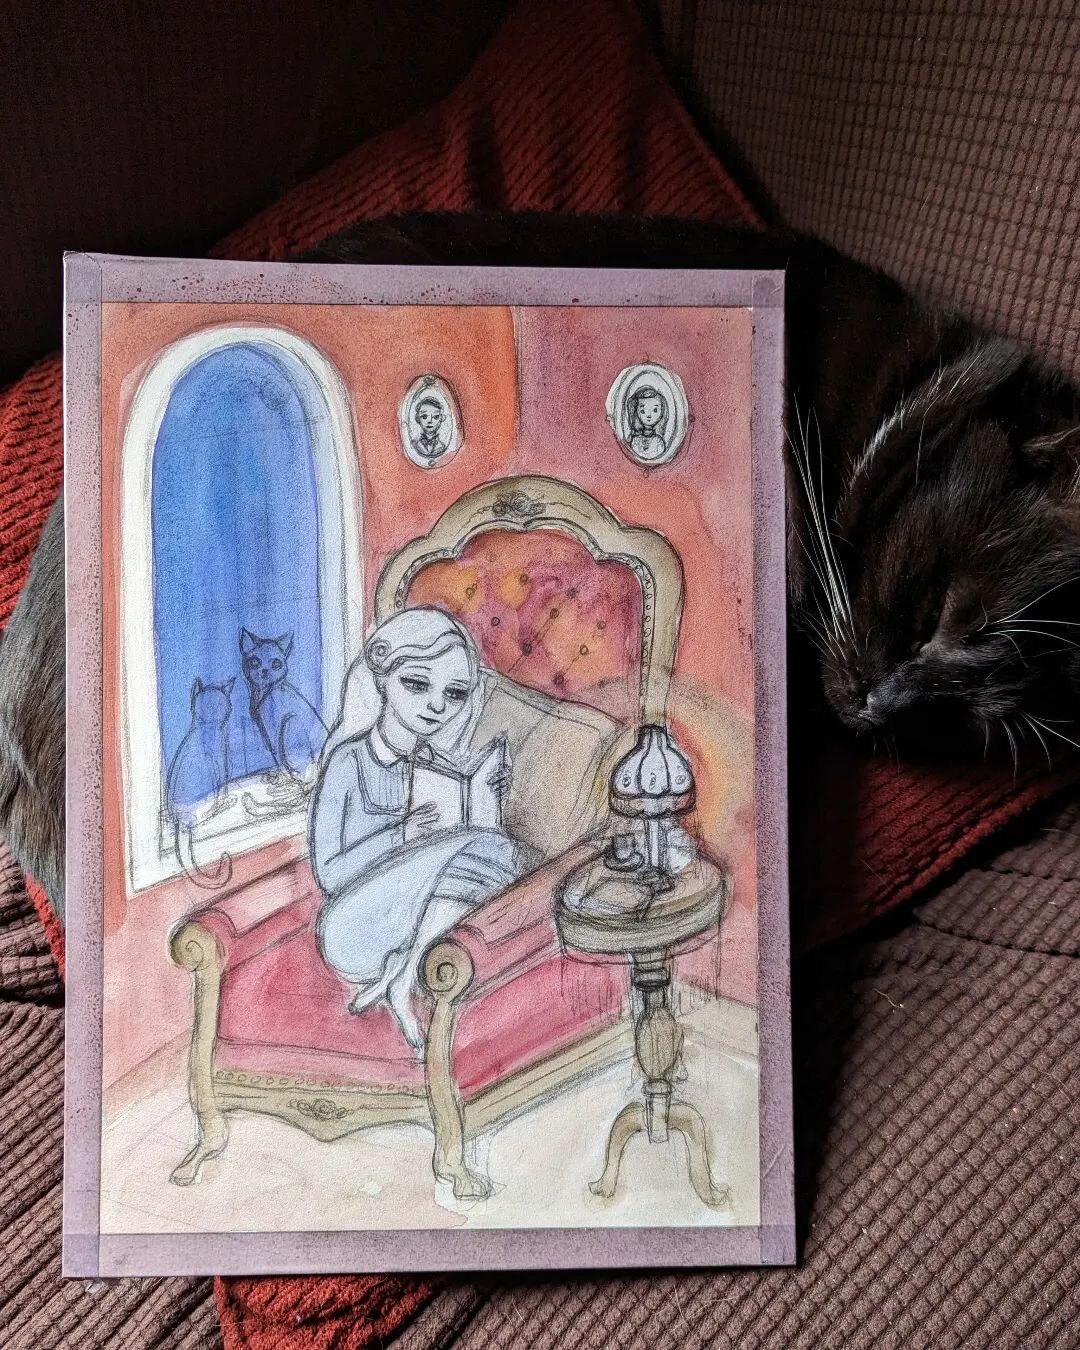 Today's work in progress. I'm busy working on a new piece for the upcoming June gallery show at City Art Gallery in San Francisco. I decided to challenge myself with creating an interior scene (Victorian, of course), and adding some of my favorite th